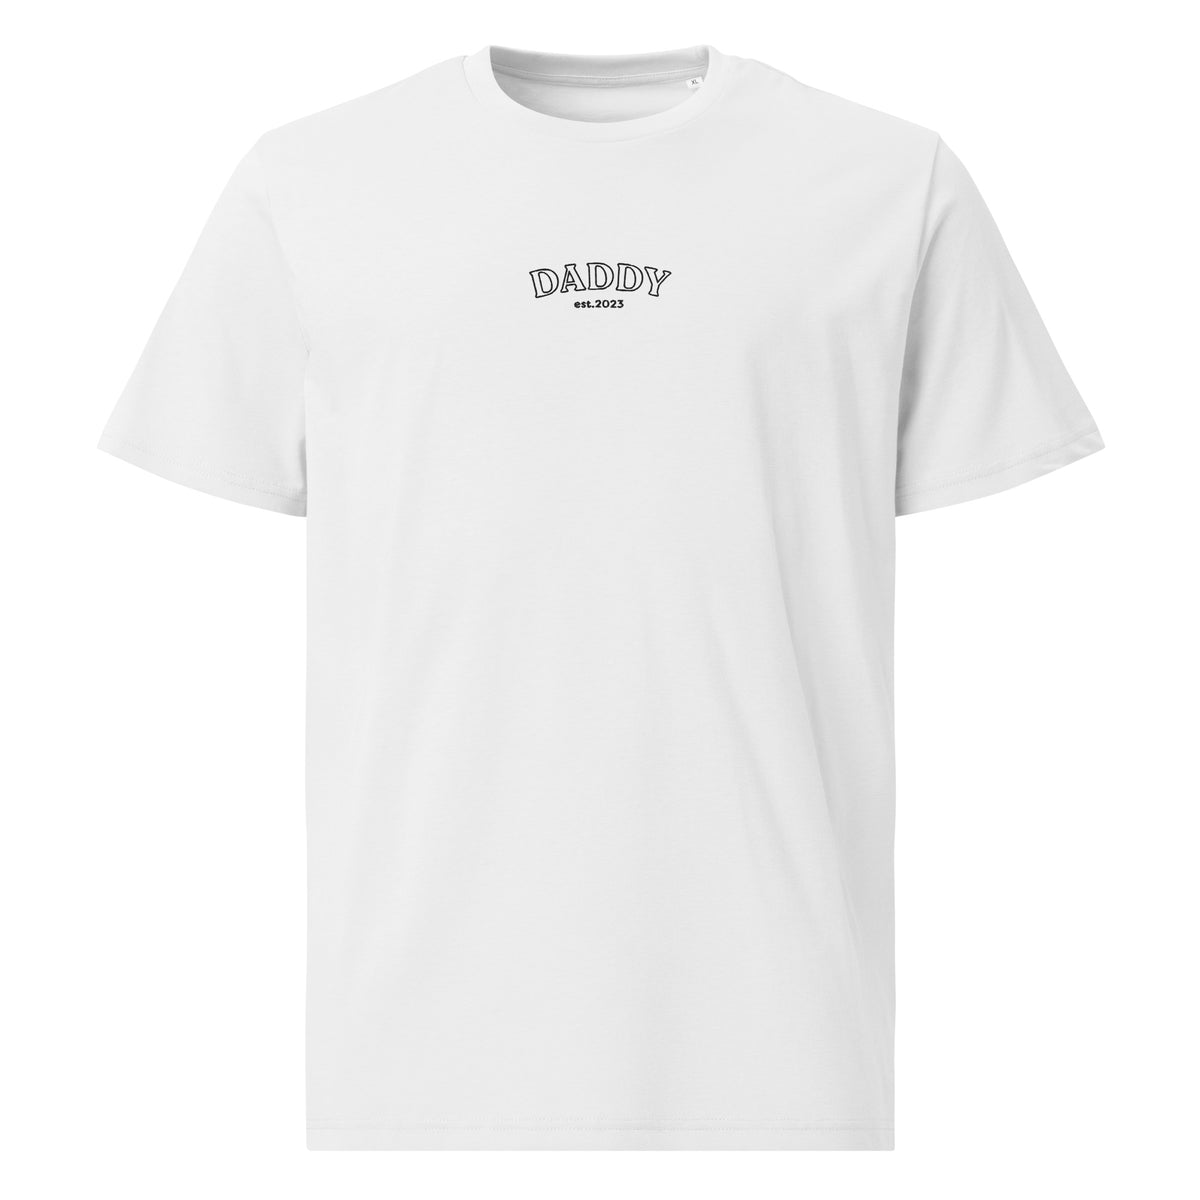 T-shirt | Daddy established + date Coeur Tendre